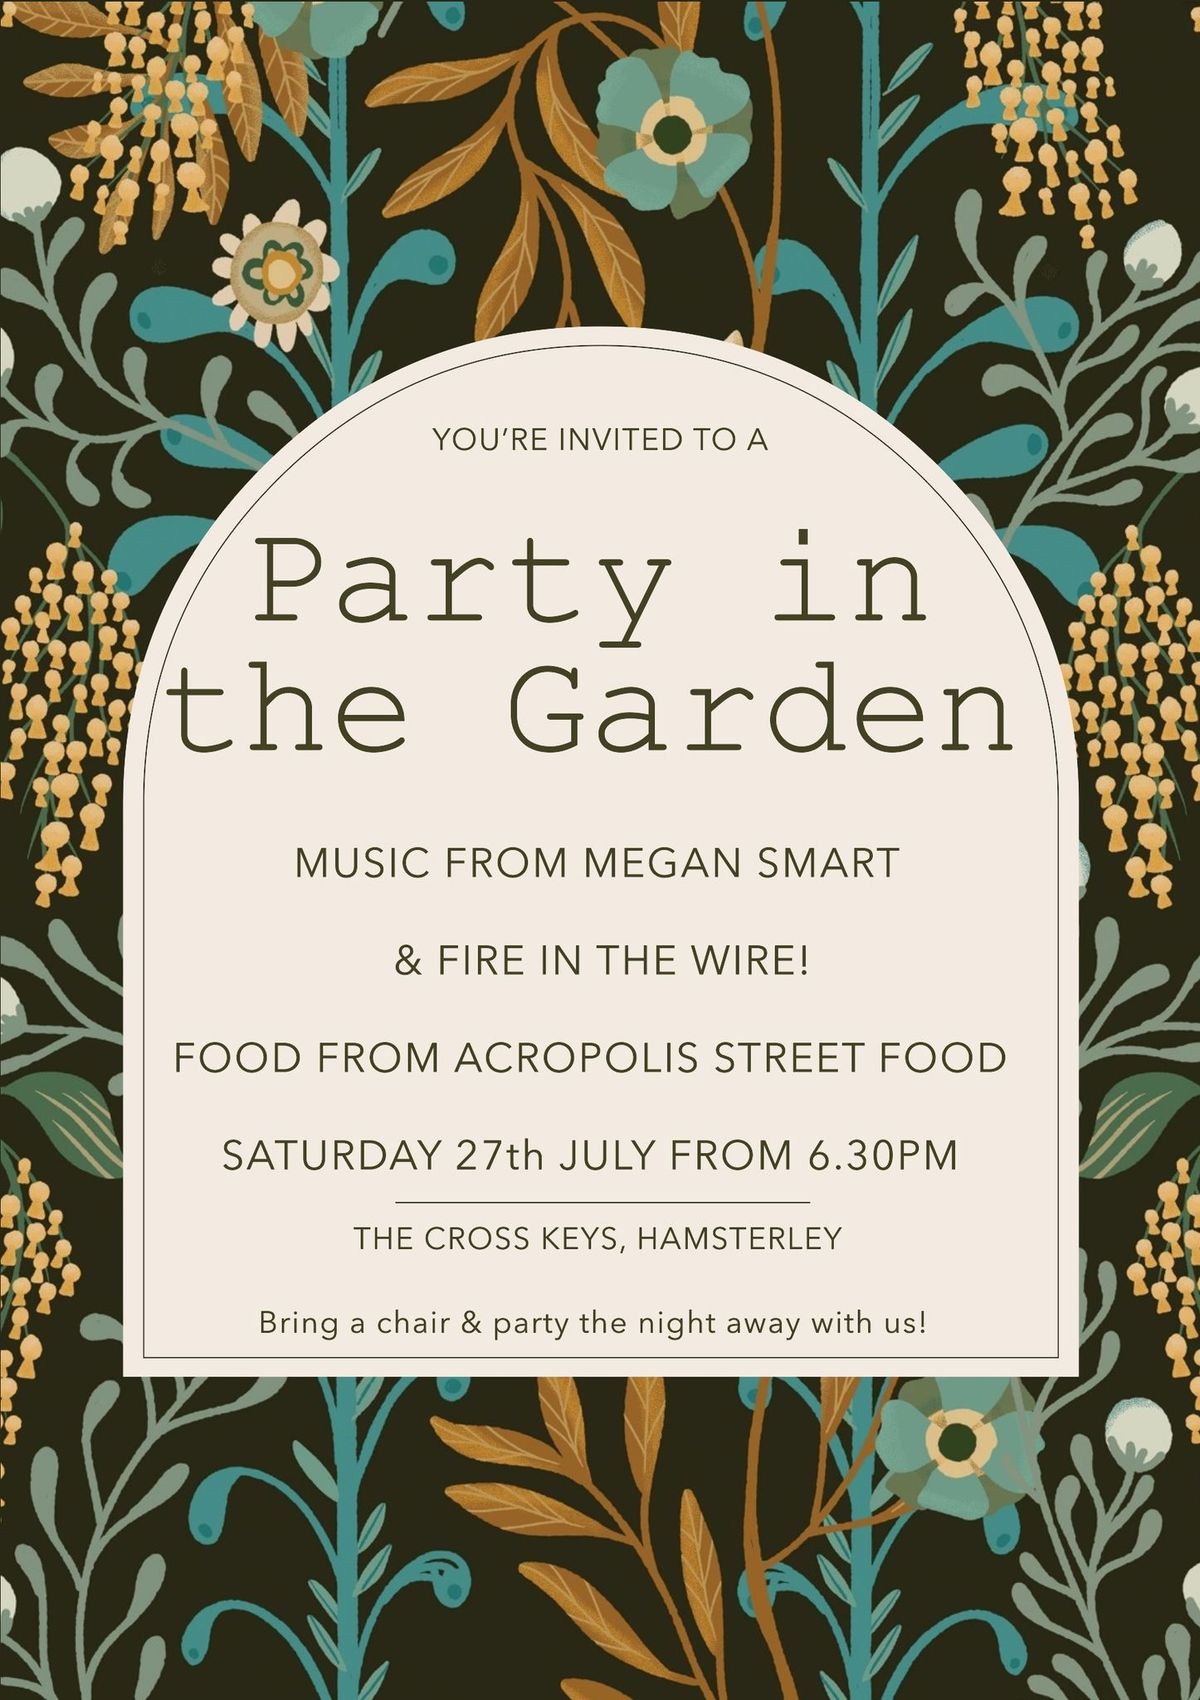 Party in the Garden 